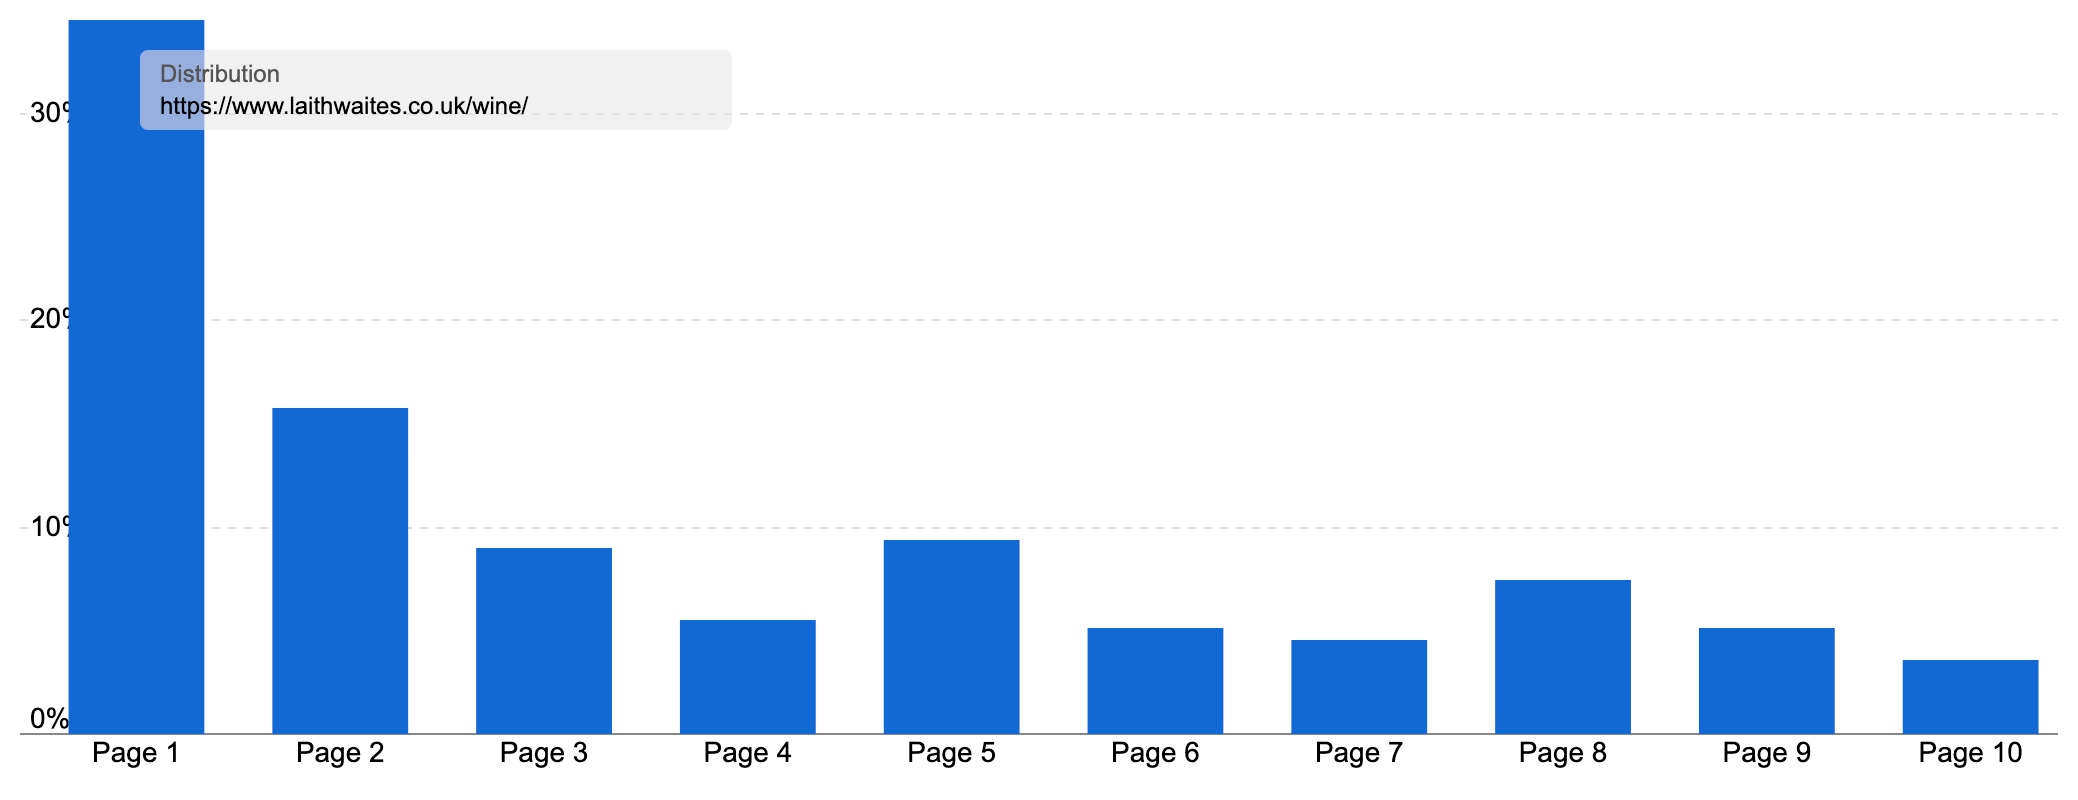 Graph showing Laithwaites' ranking distribution over Google's first 10 pages.